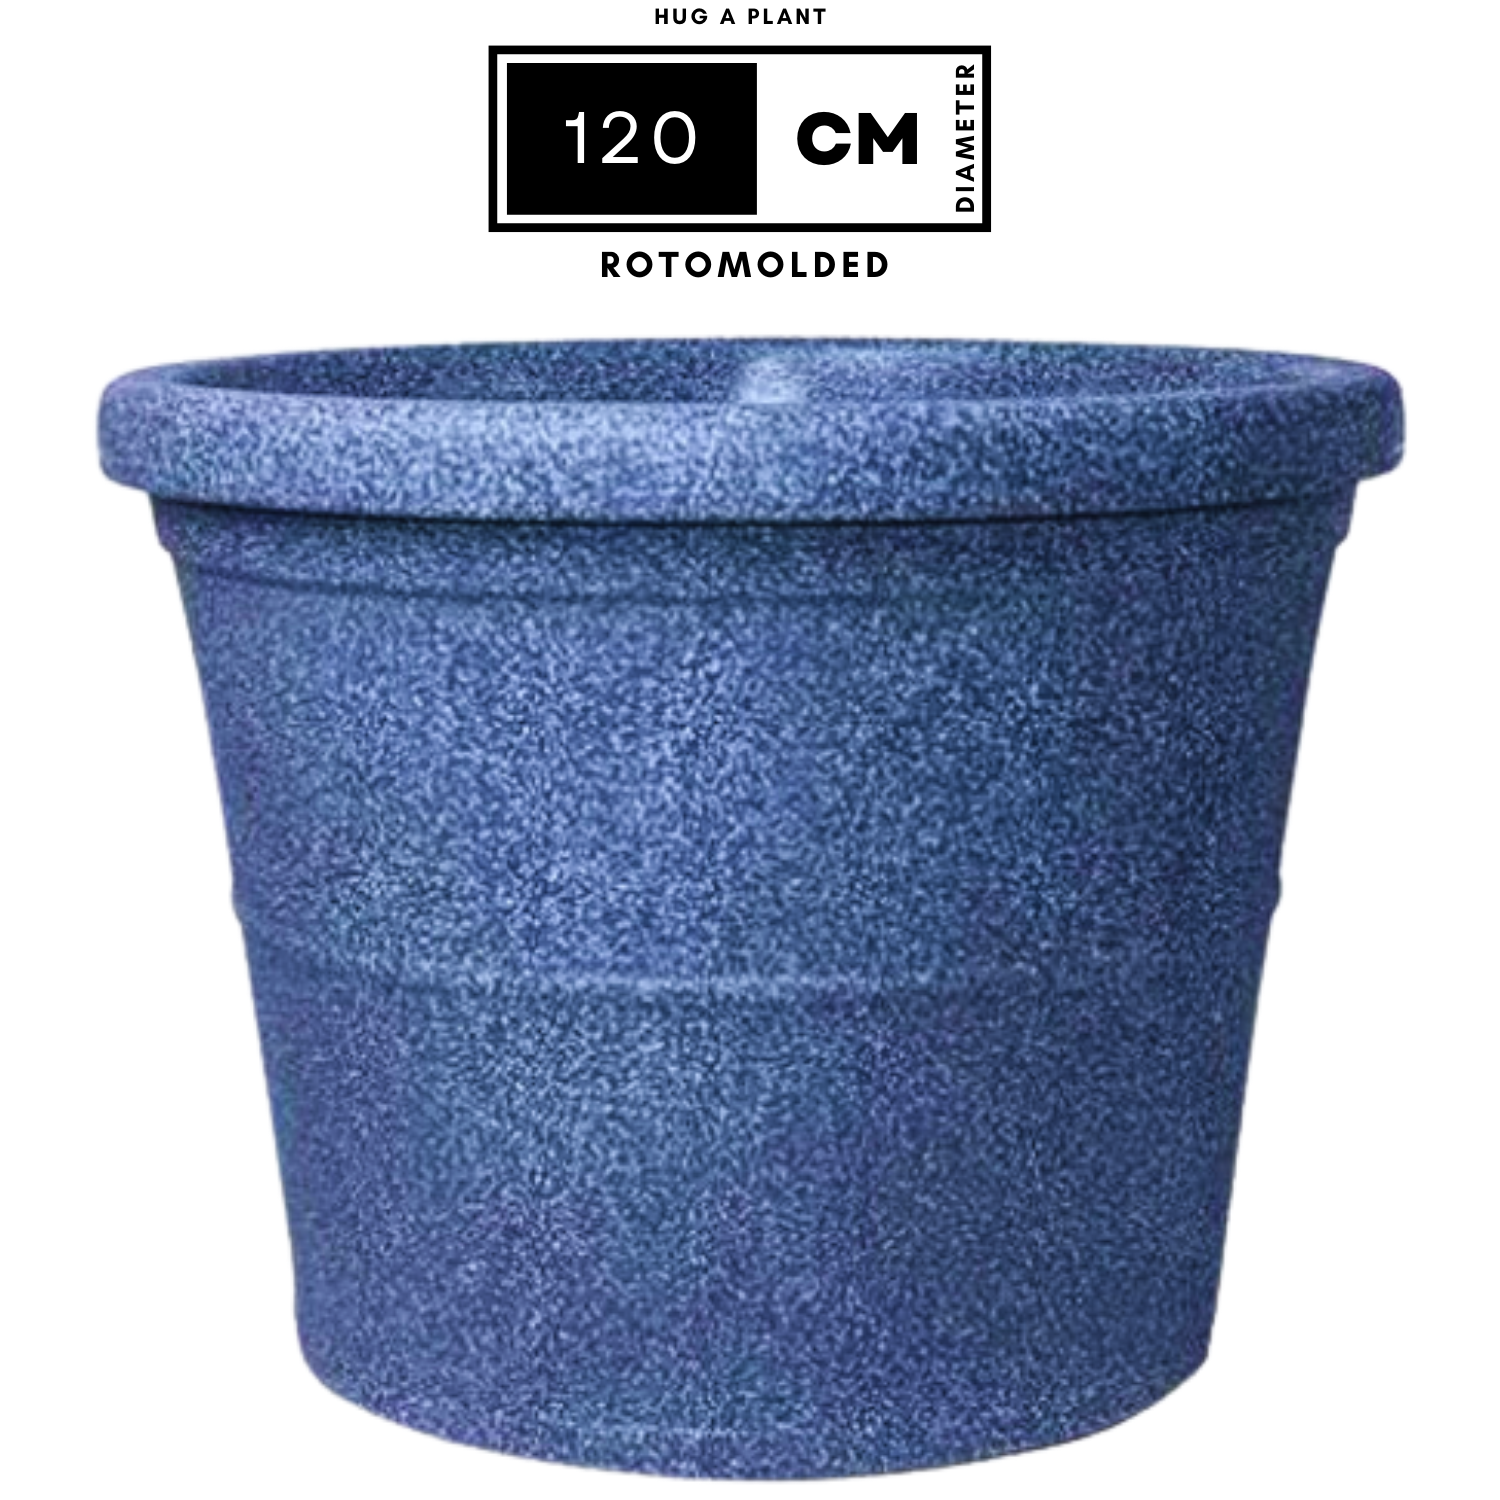 Duro Rotomolded Round Plastic Pot For Home & Garden (Midnight Stone Finish, Pack Of 1)